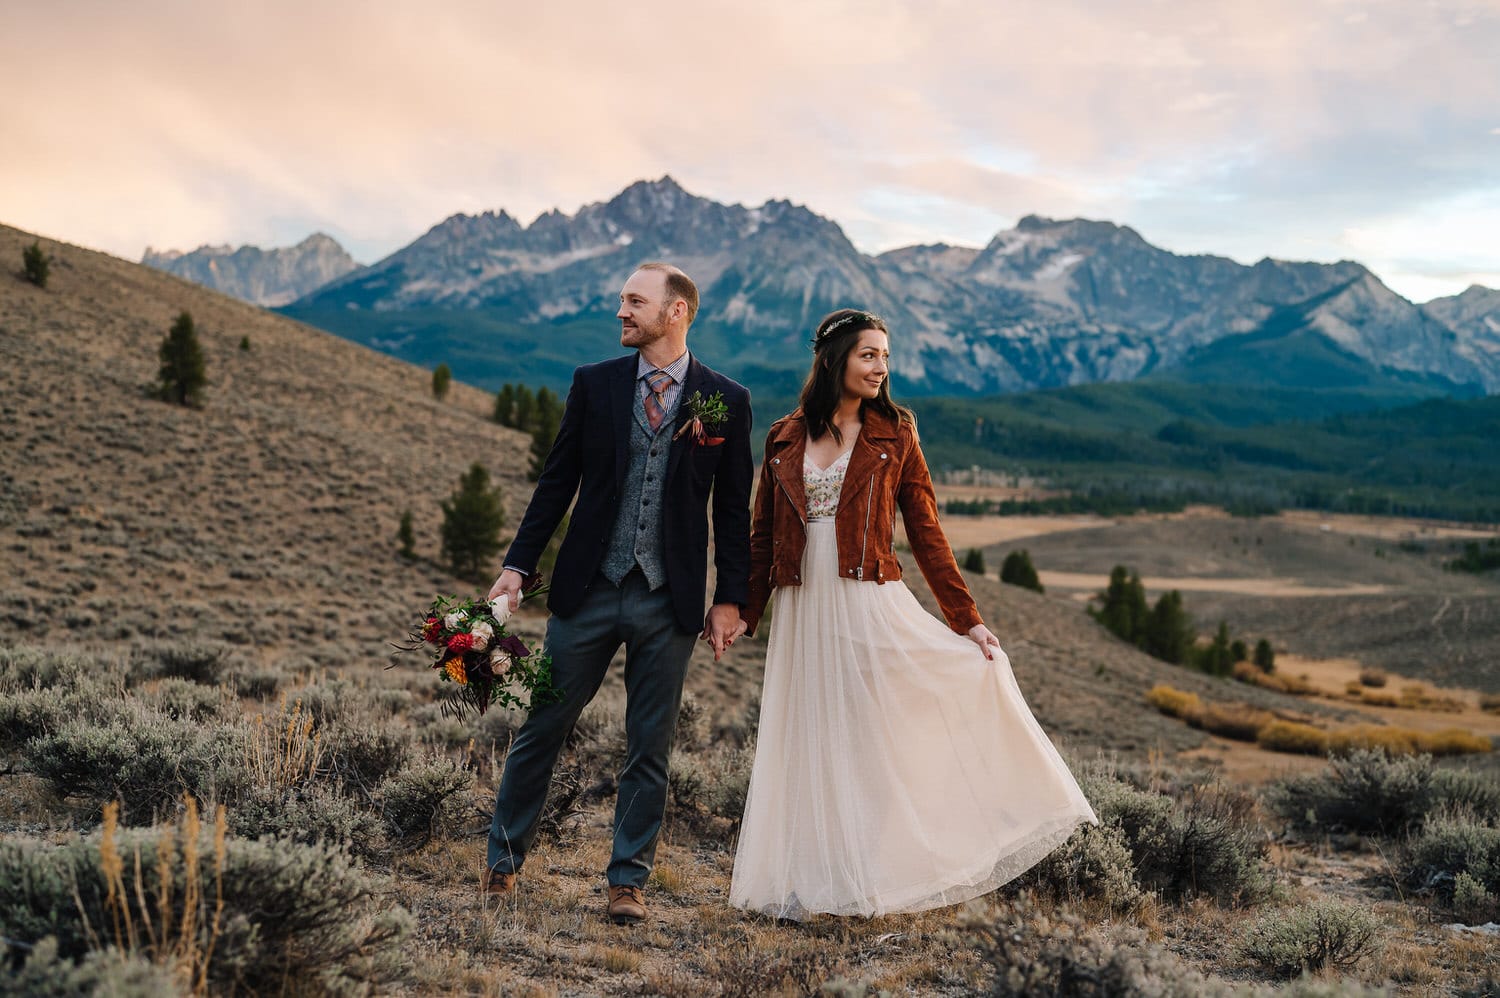 Autumn, an Idaho elopement photographer, captures a couple in a mountain landscape in Stanley, Idaho on their elopement day.